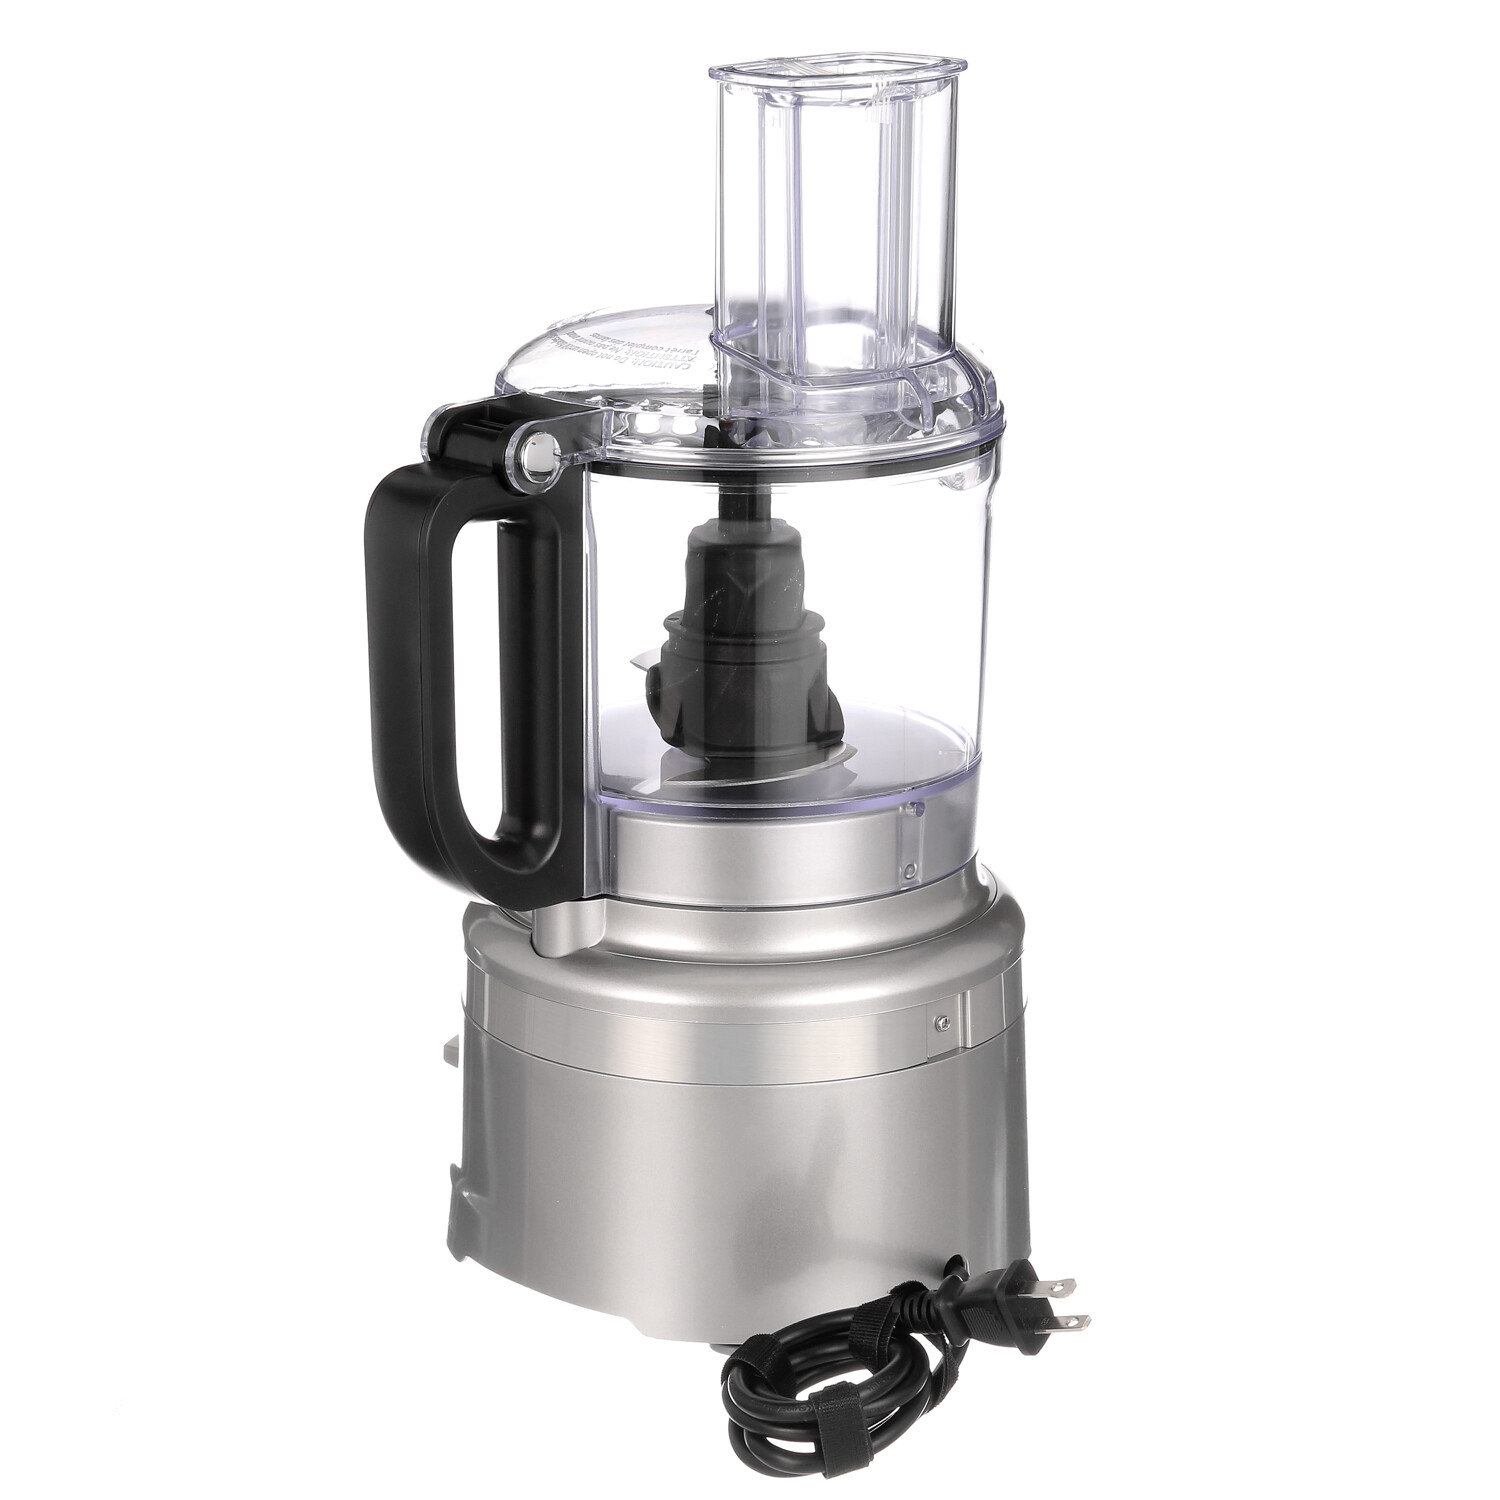 How To Use The KitchenAid® 7-Cup Food Processor Plus 